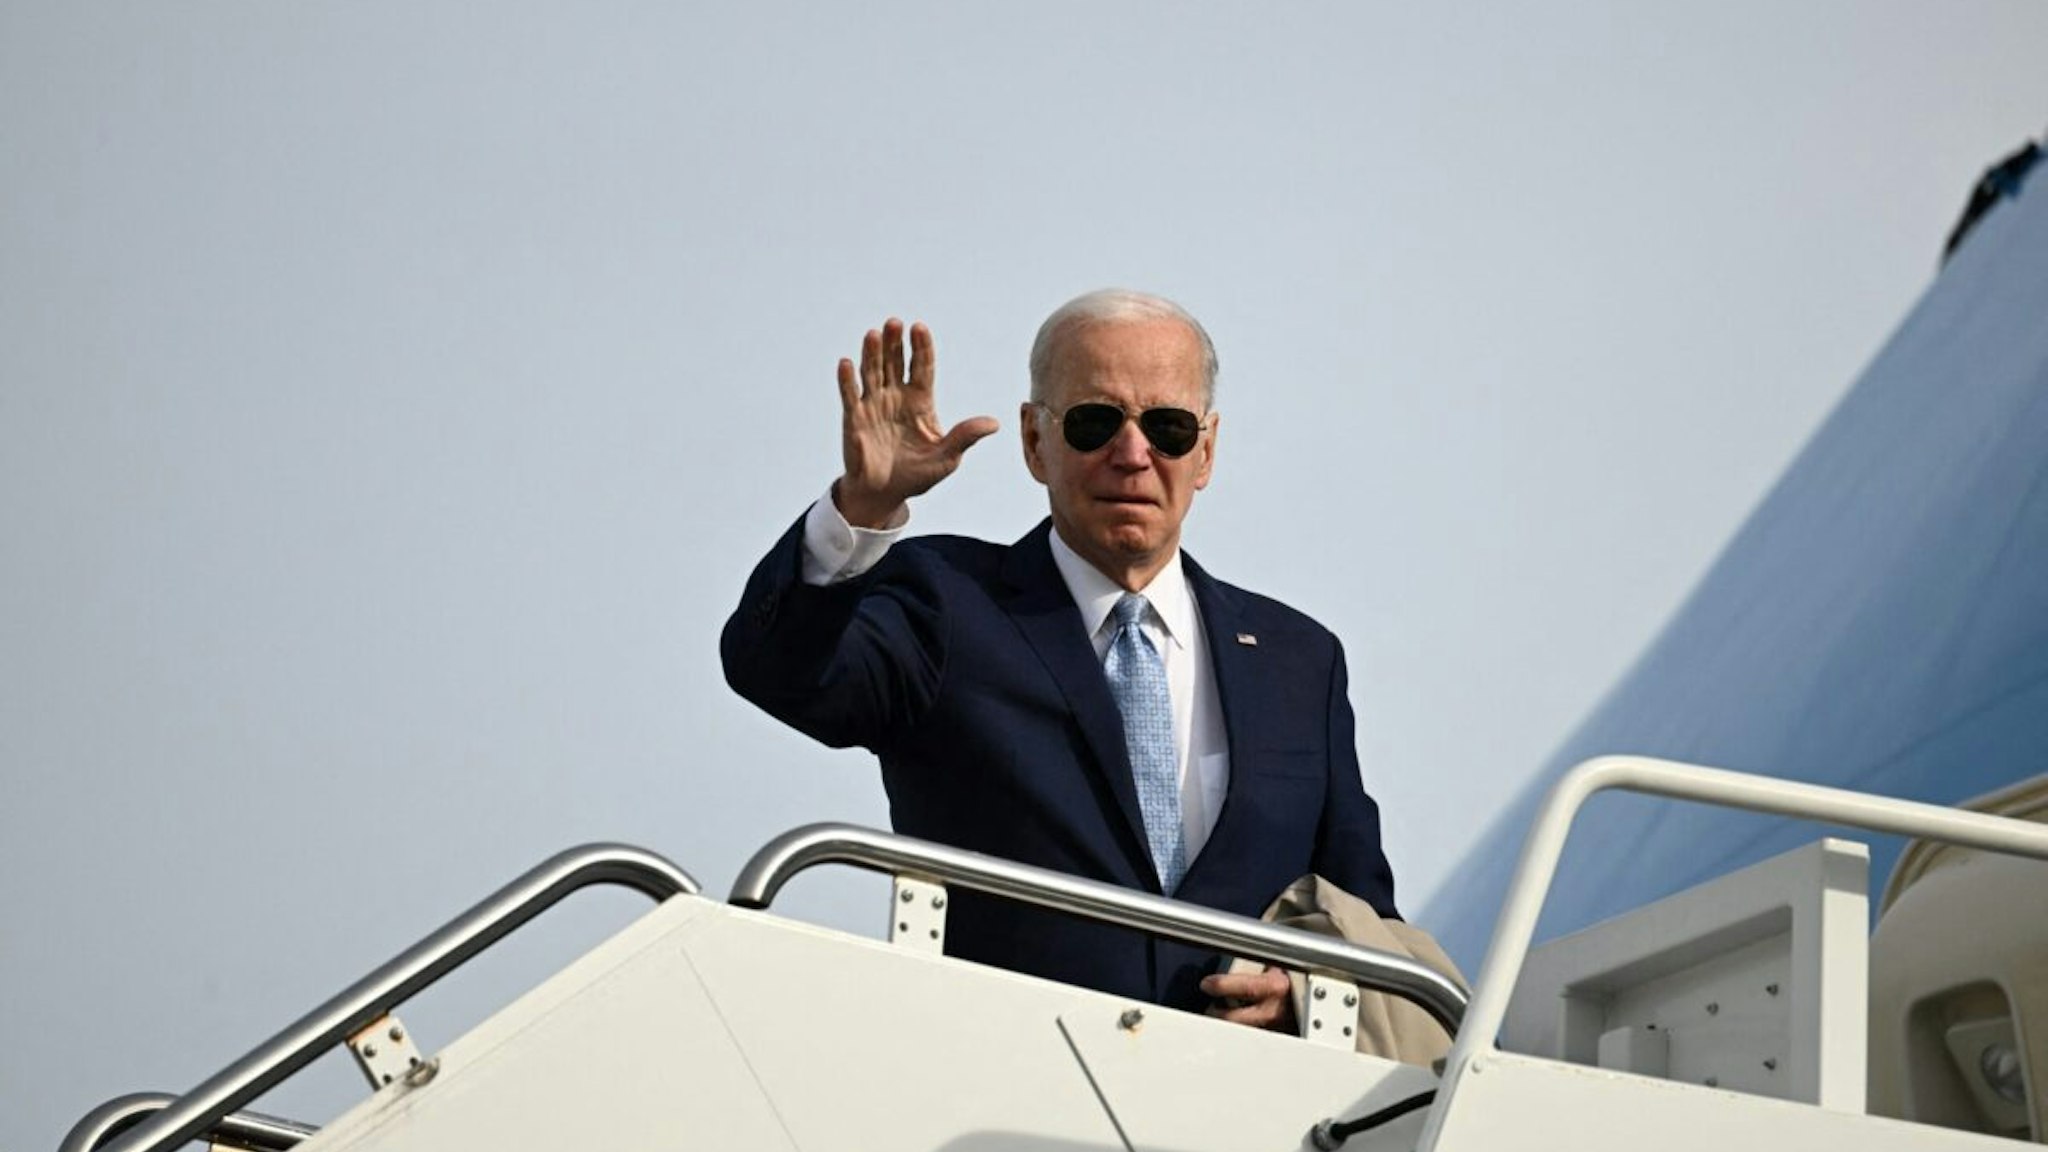 US President Joe Biden boards Air Force One at Joint Base Andrews in Maryland on January 8, 2023. - Biden is travelling to the US-Mexico border in El Paso, Texas, before continuing on to Mexico City.